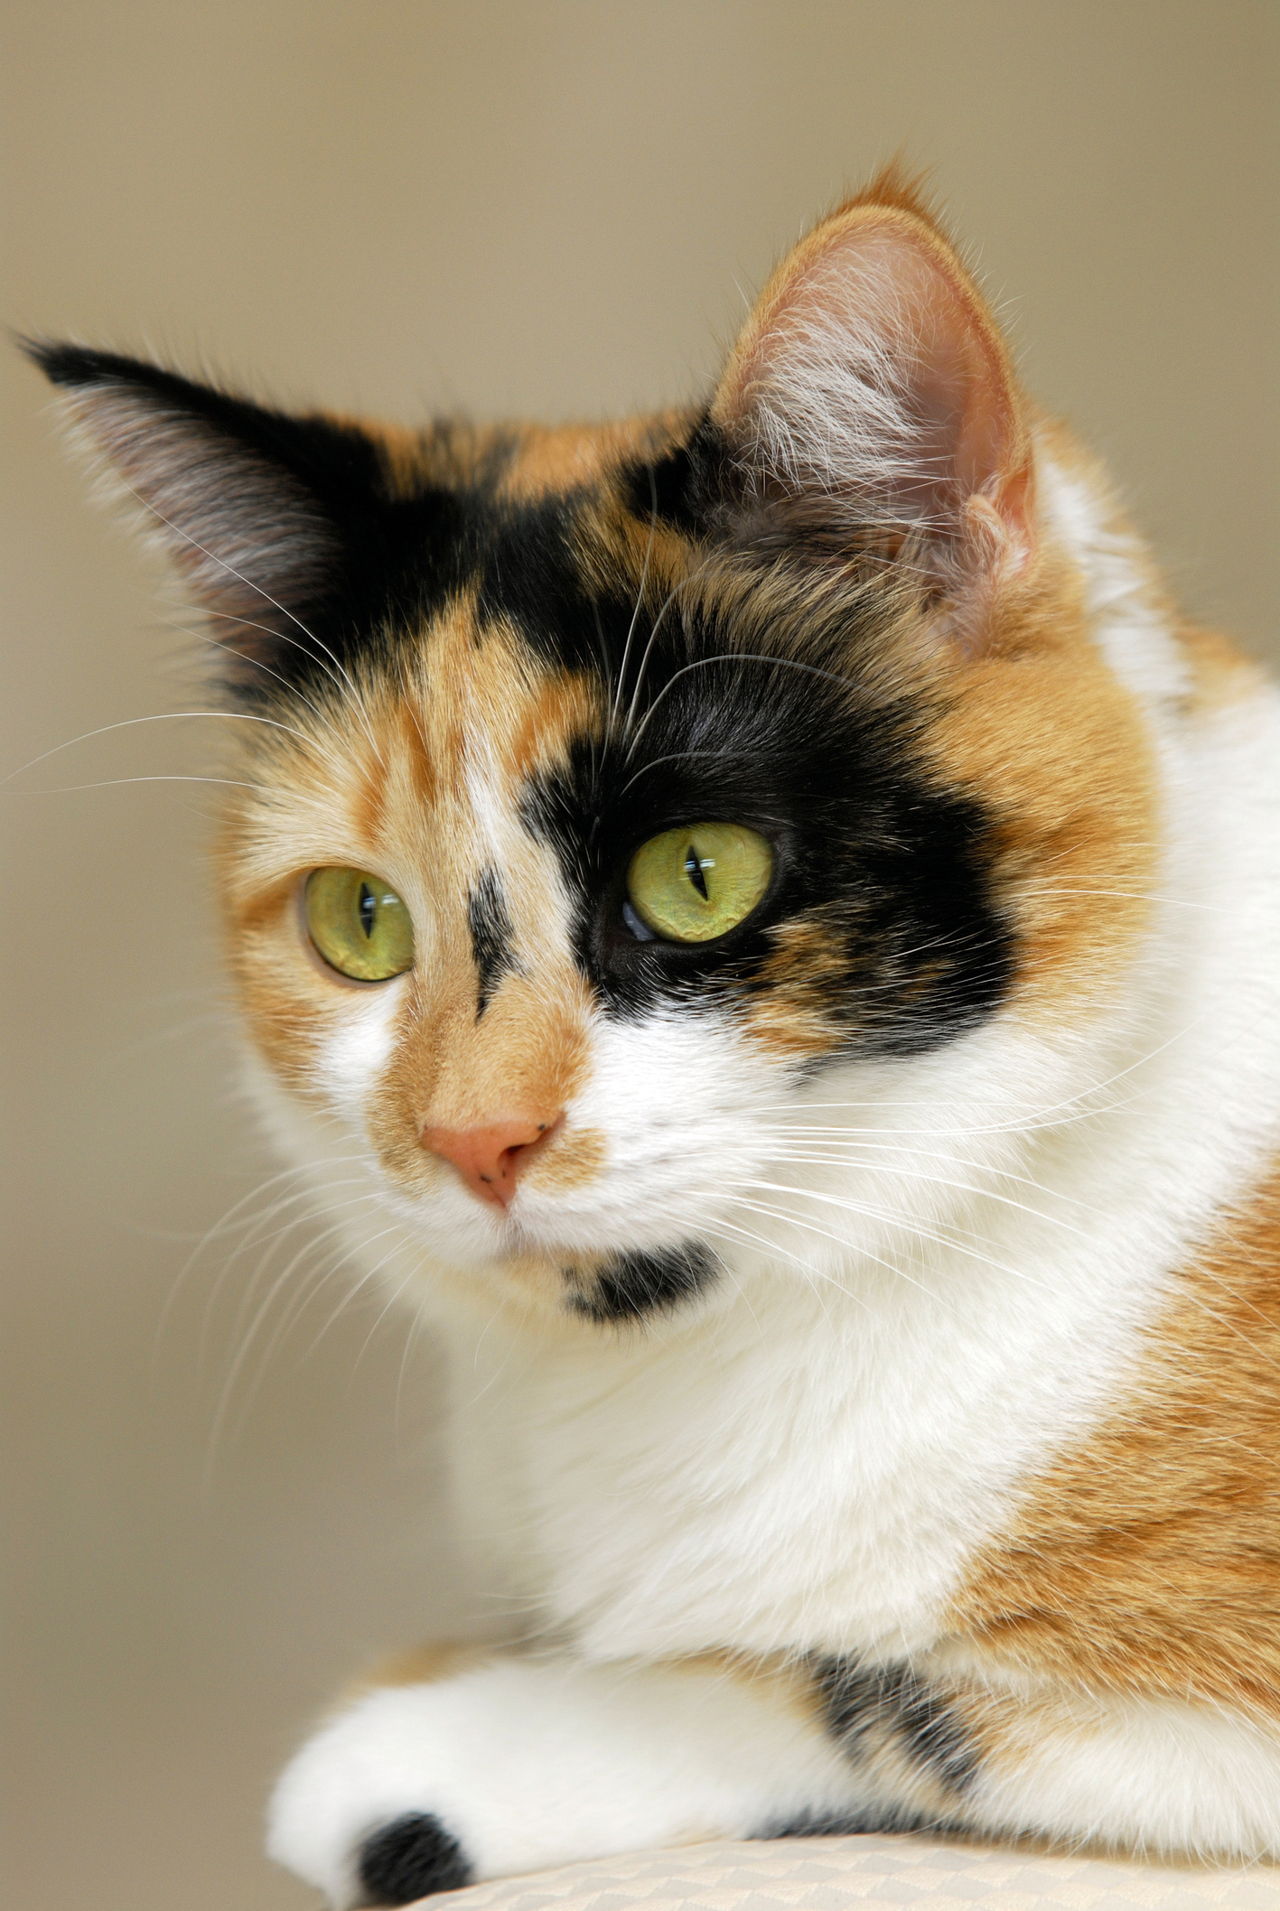 Awesome Facts About Calico Cats That are Sure to Blow Your Mind